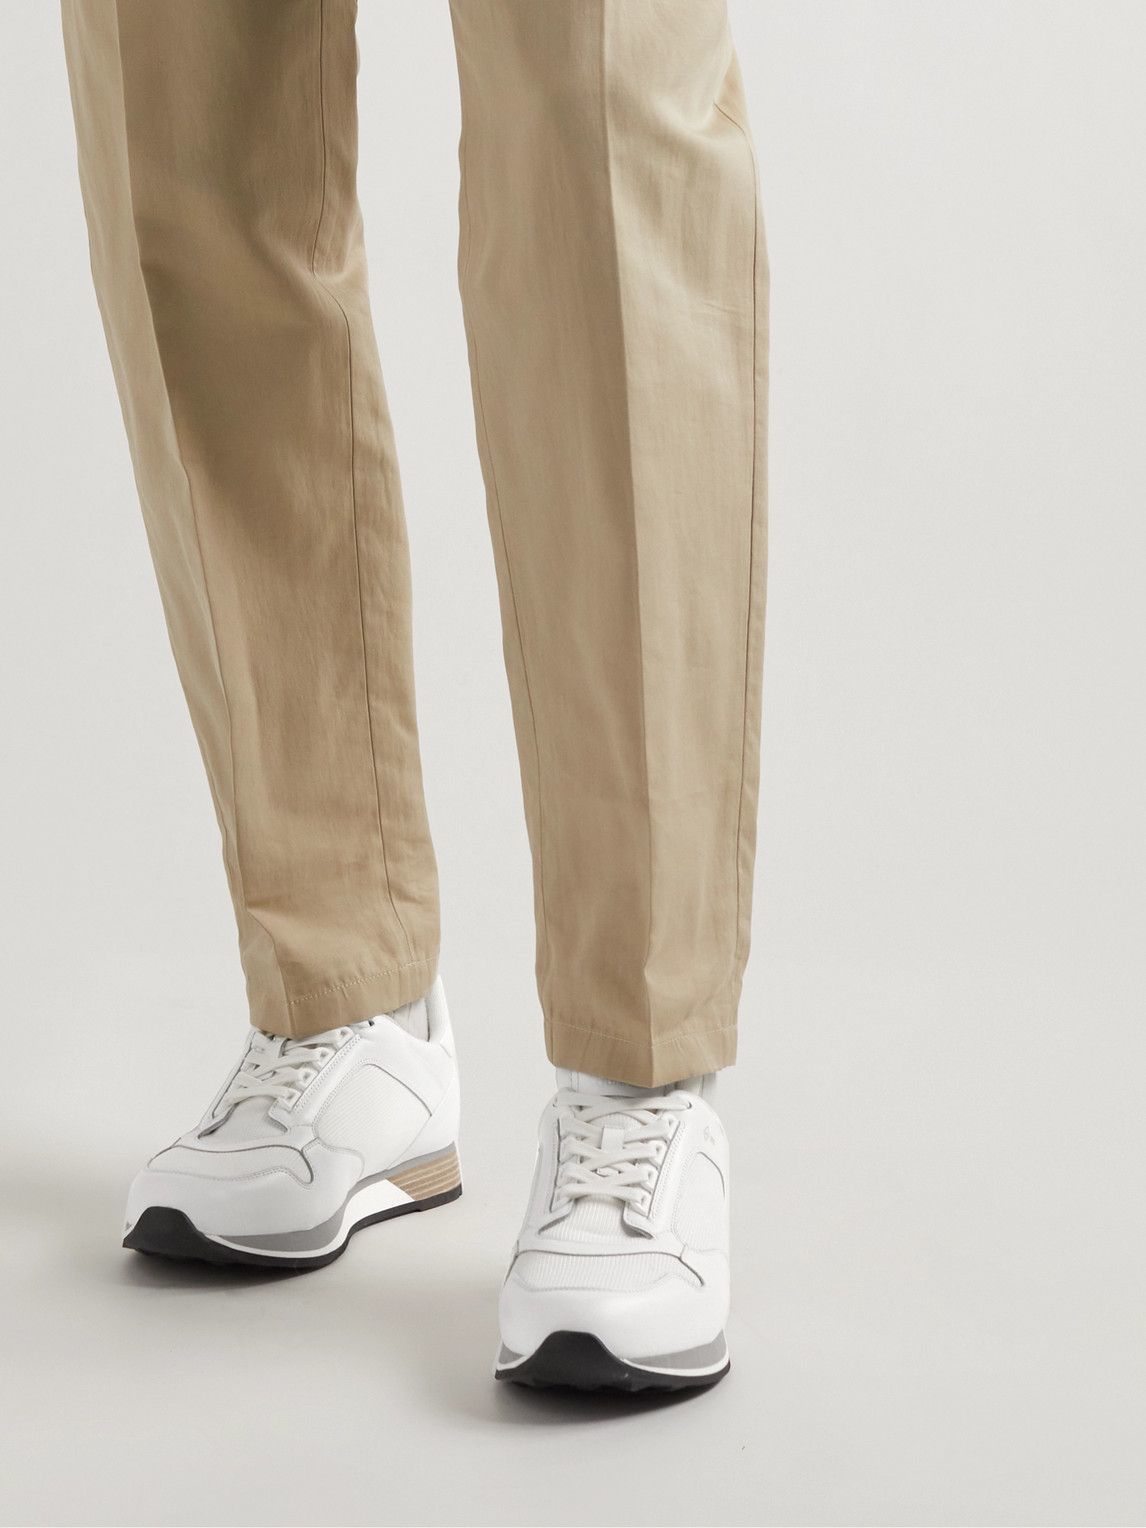 Dunhill - Duke Mesh and Leather Sneakers - White Dunhill